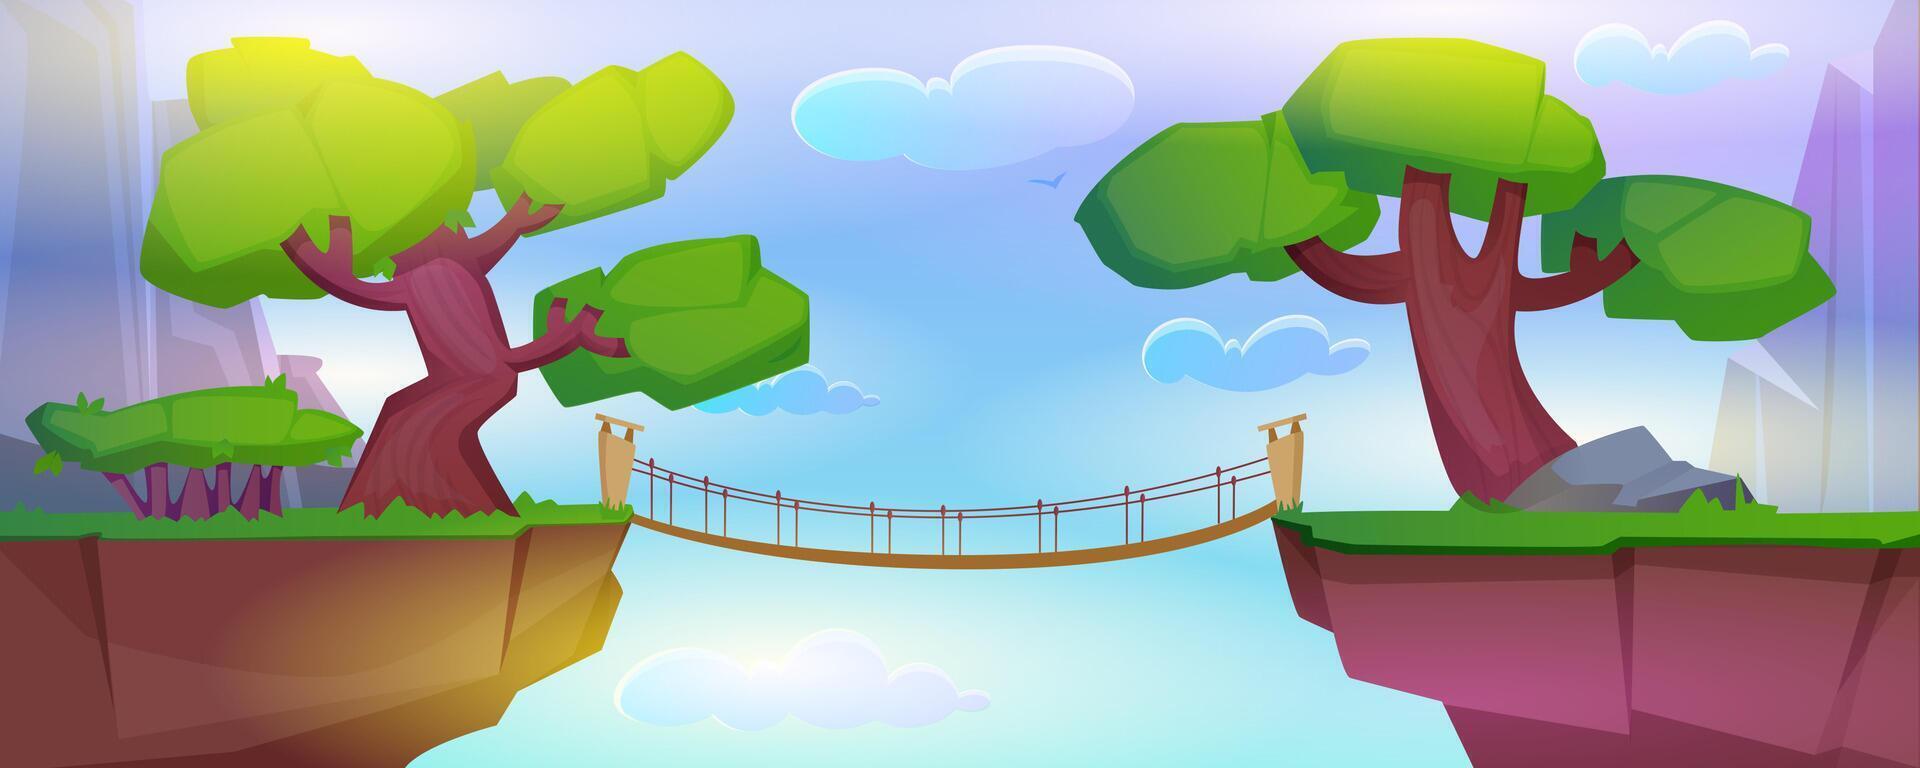 Summer landscape with mountains, plants and log bridge over precipice between cliffs. Cartoon illustration of rocks, green grass and trees, wooden rope footbridge over abyss at day. vector